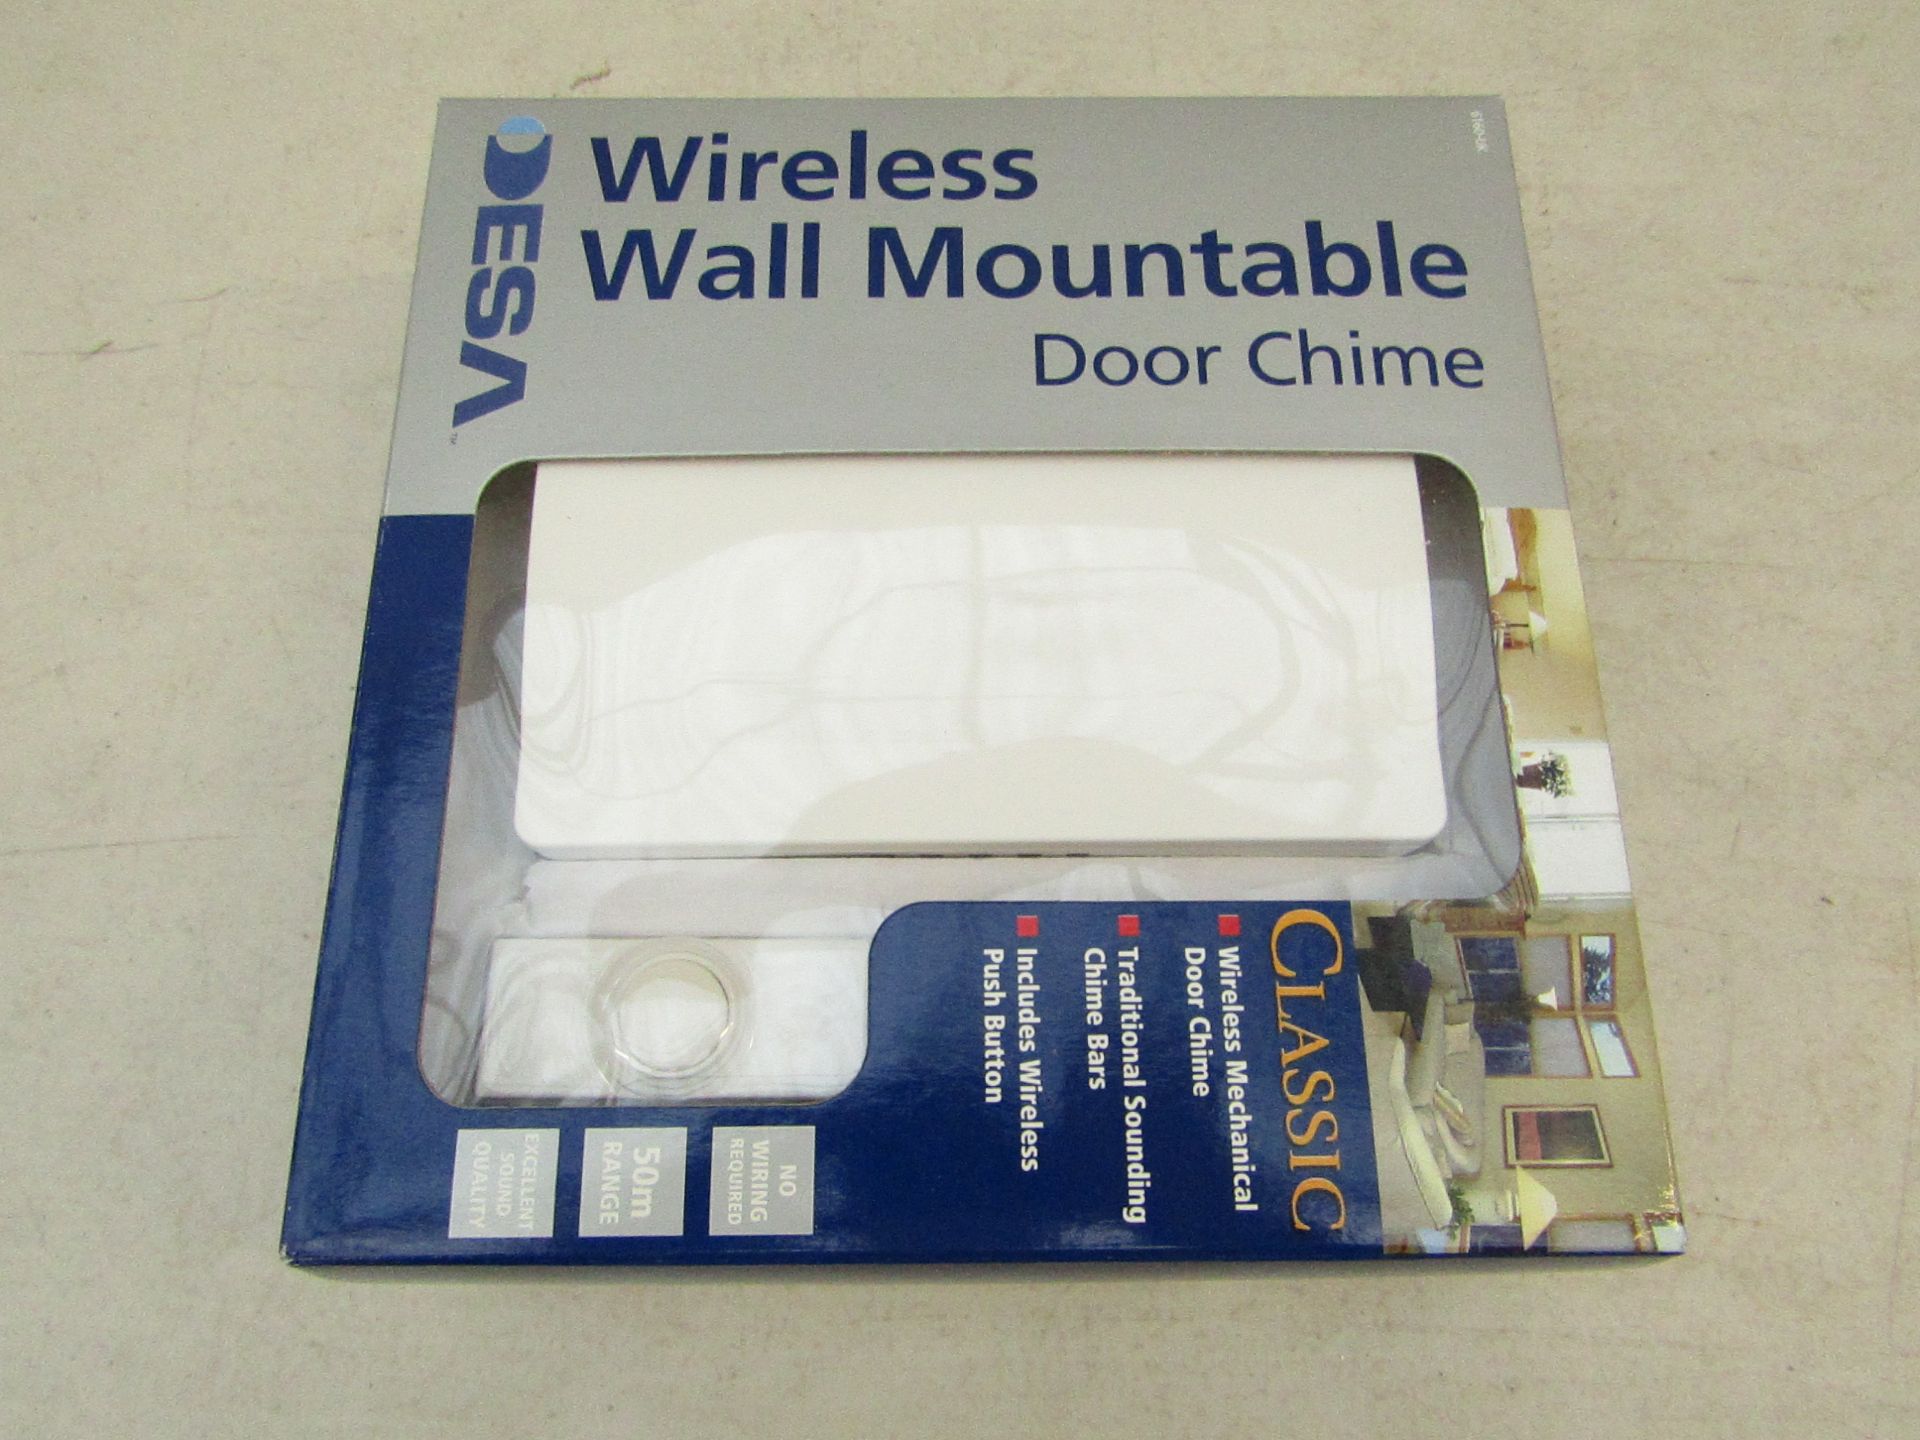 Desa wireless wall mounted door chime, new and packaged.